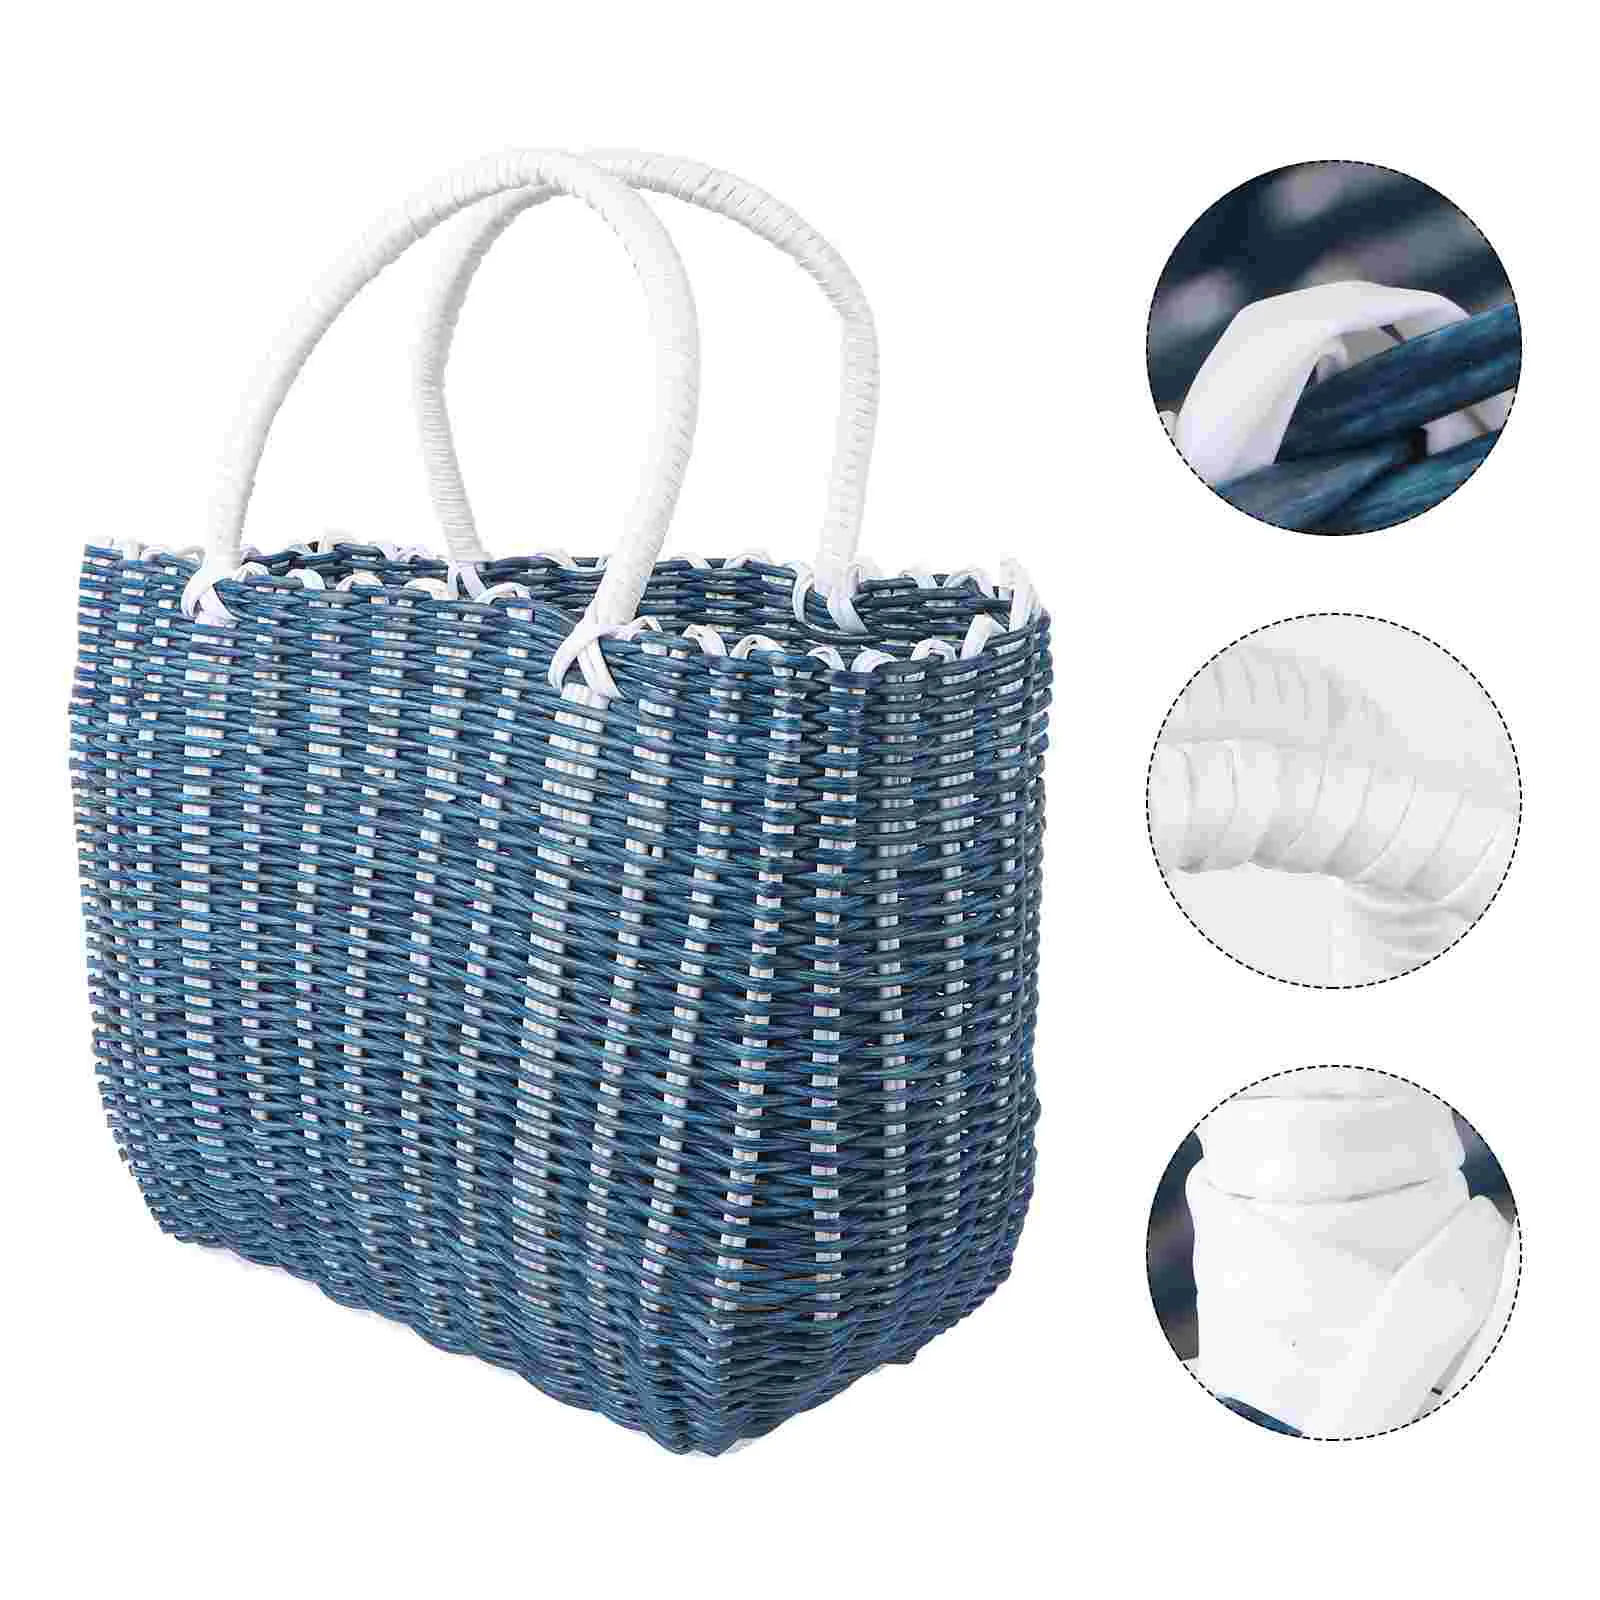 

Basket Bags With Handles Shopping Market Woven Tote Bag Reusable Farmers Grocery For Groceries Baskets French Straw Kitchen